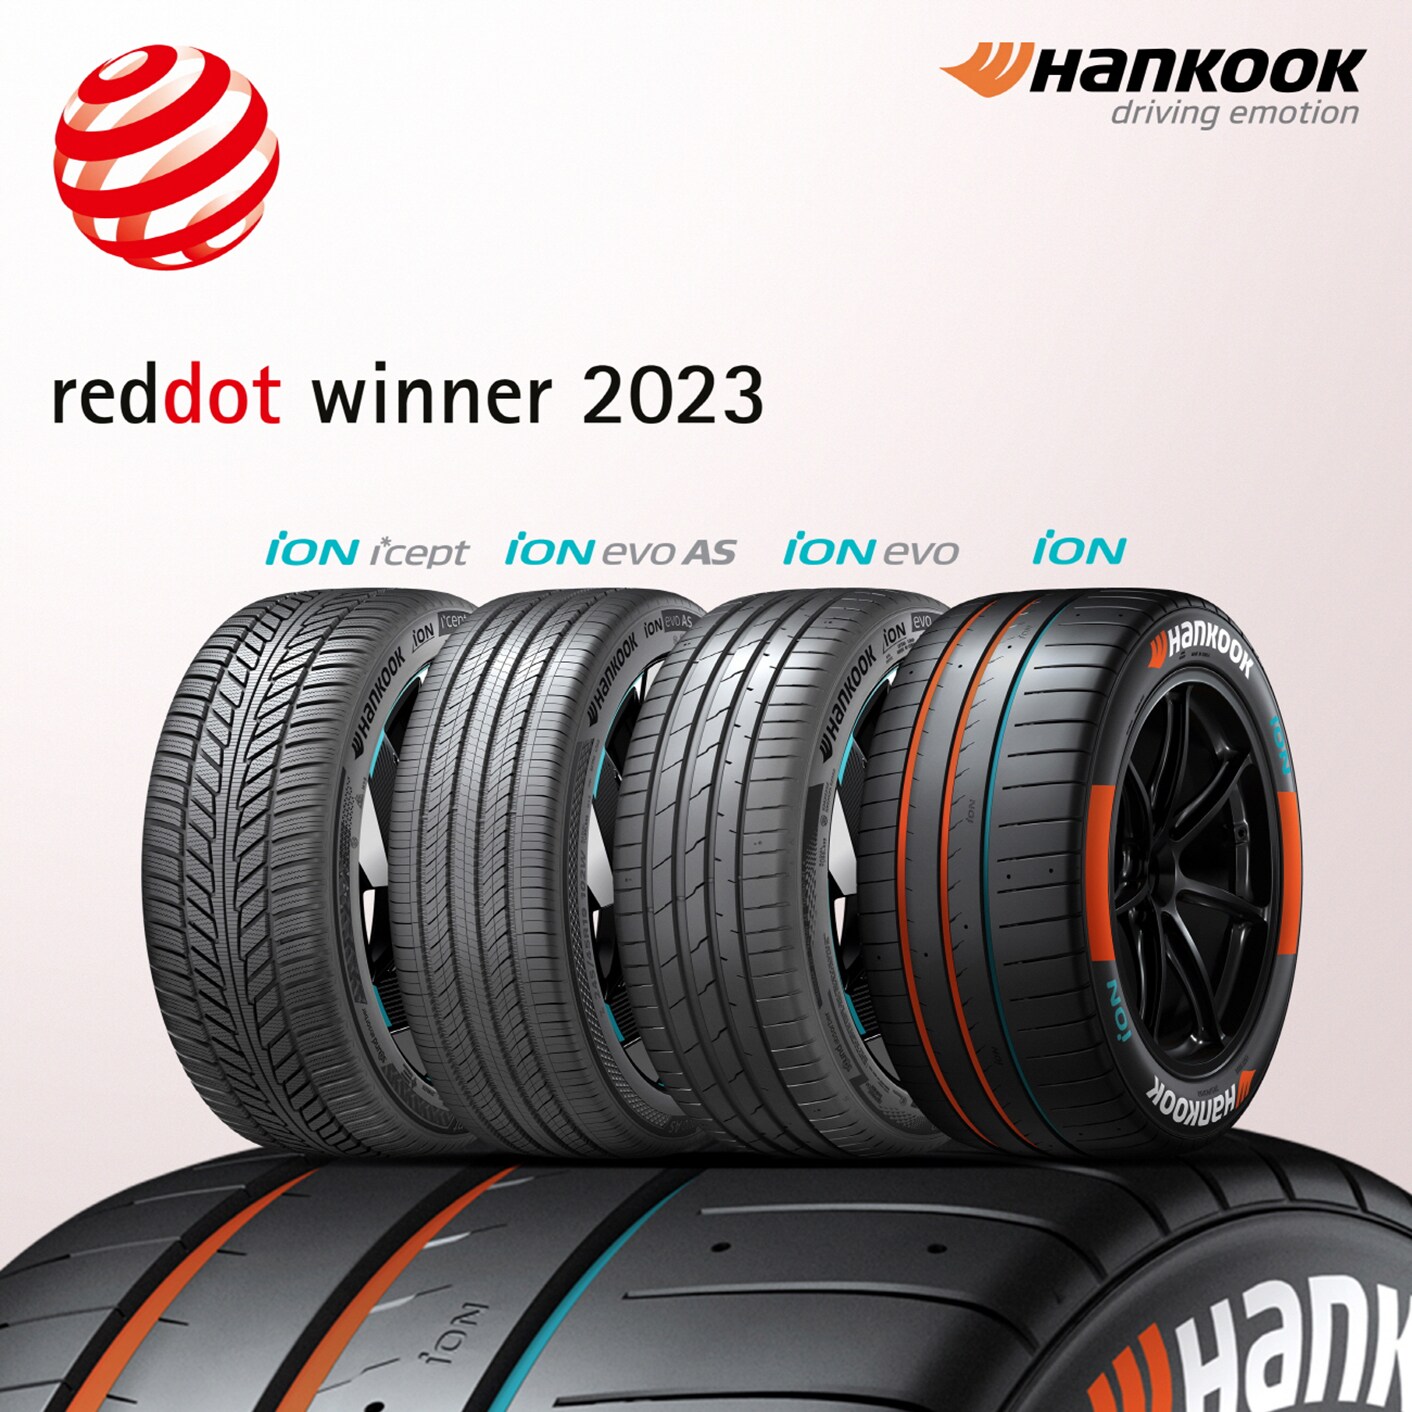 Hankook Tire’s iON wins 4 awards at the Red Dot Design Award 2023